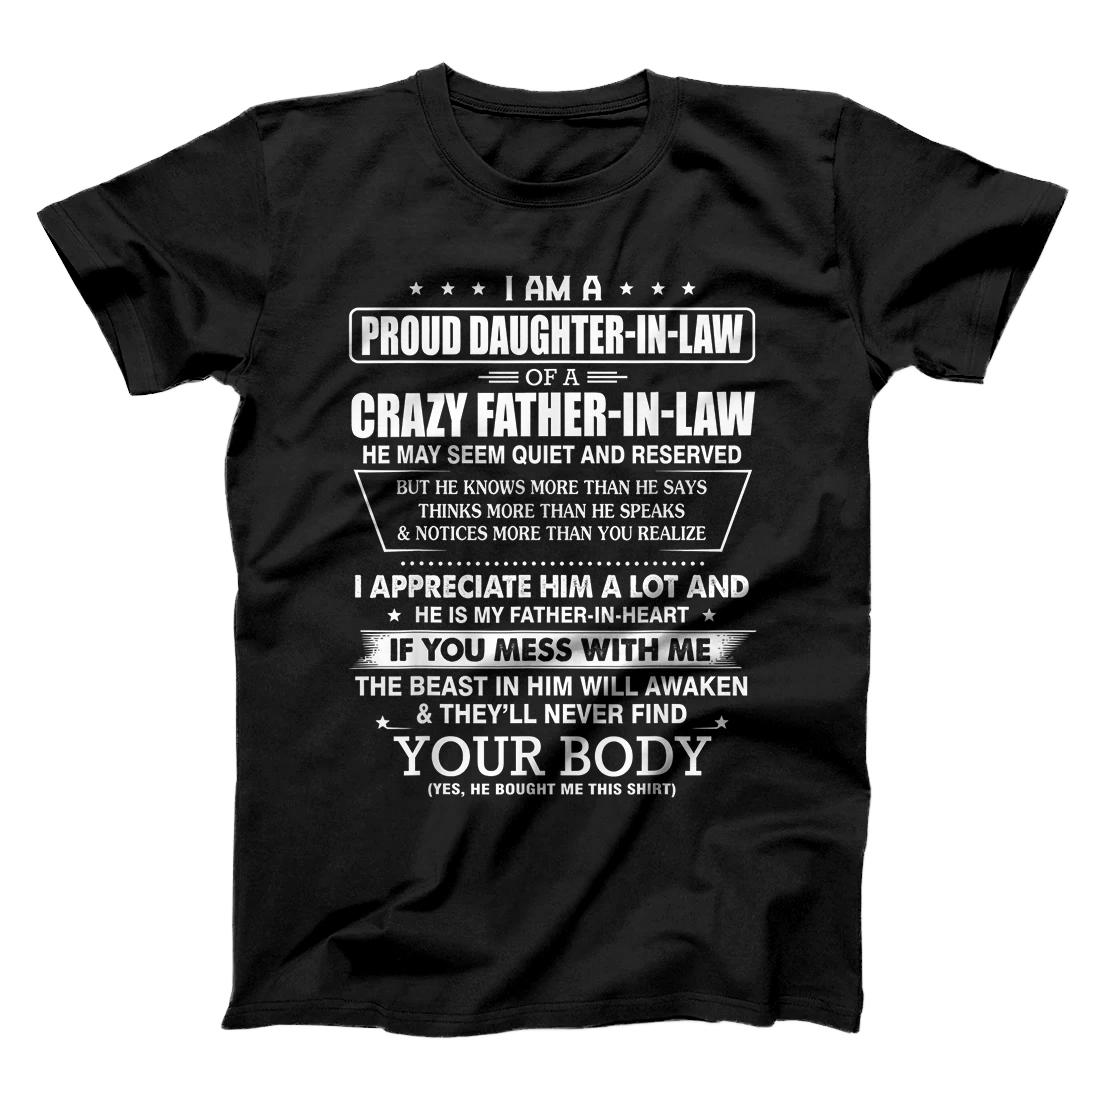 I am a proud daughter-in-law of a crazy father-in-law shirt T-Shirt ...